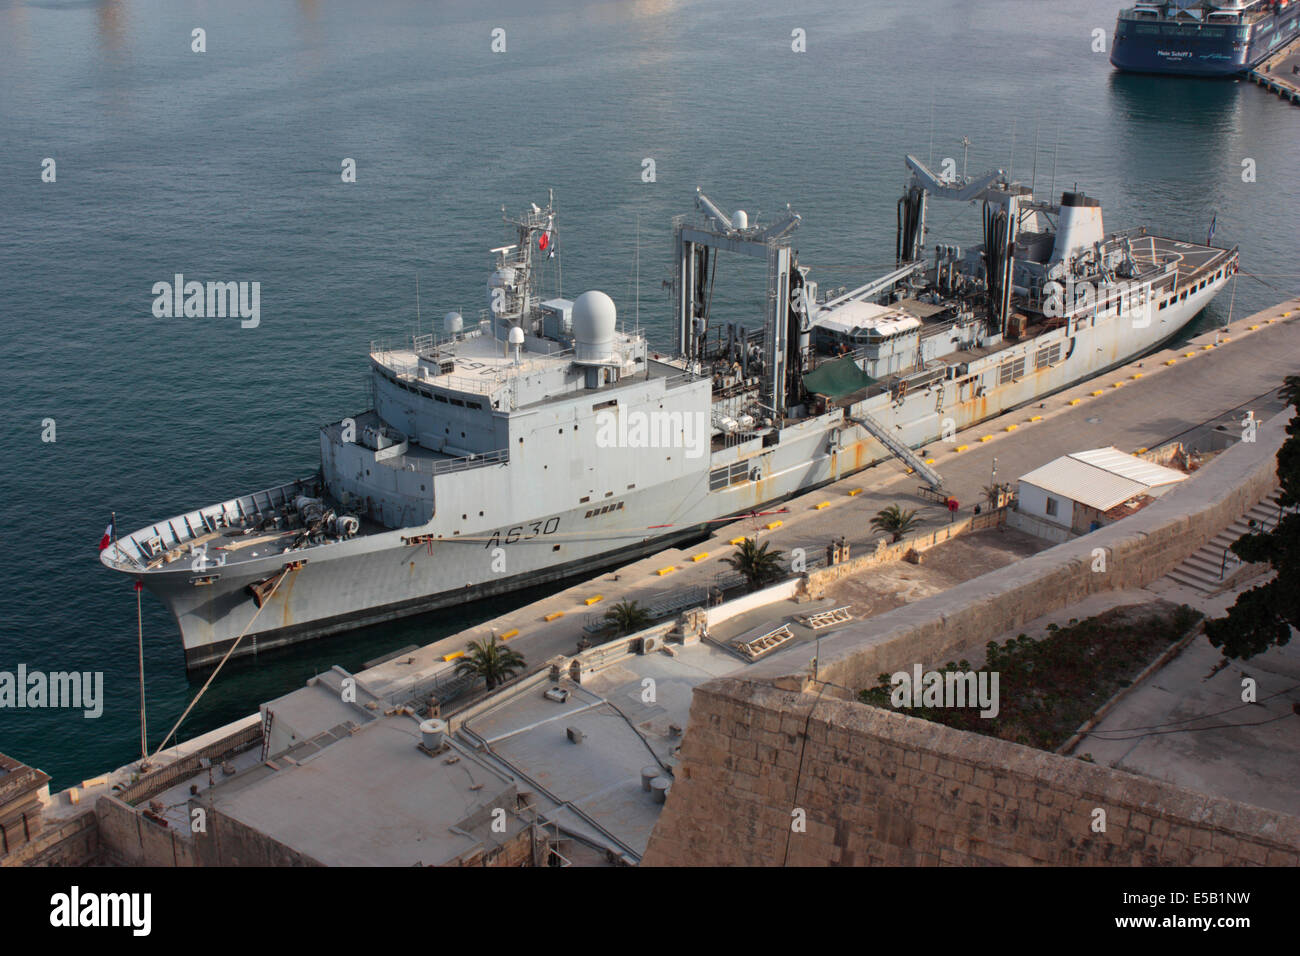 The French Navy oiler Marne at rest in Malta's Grand Harbour. Military logistics. Stock Photo